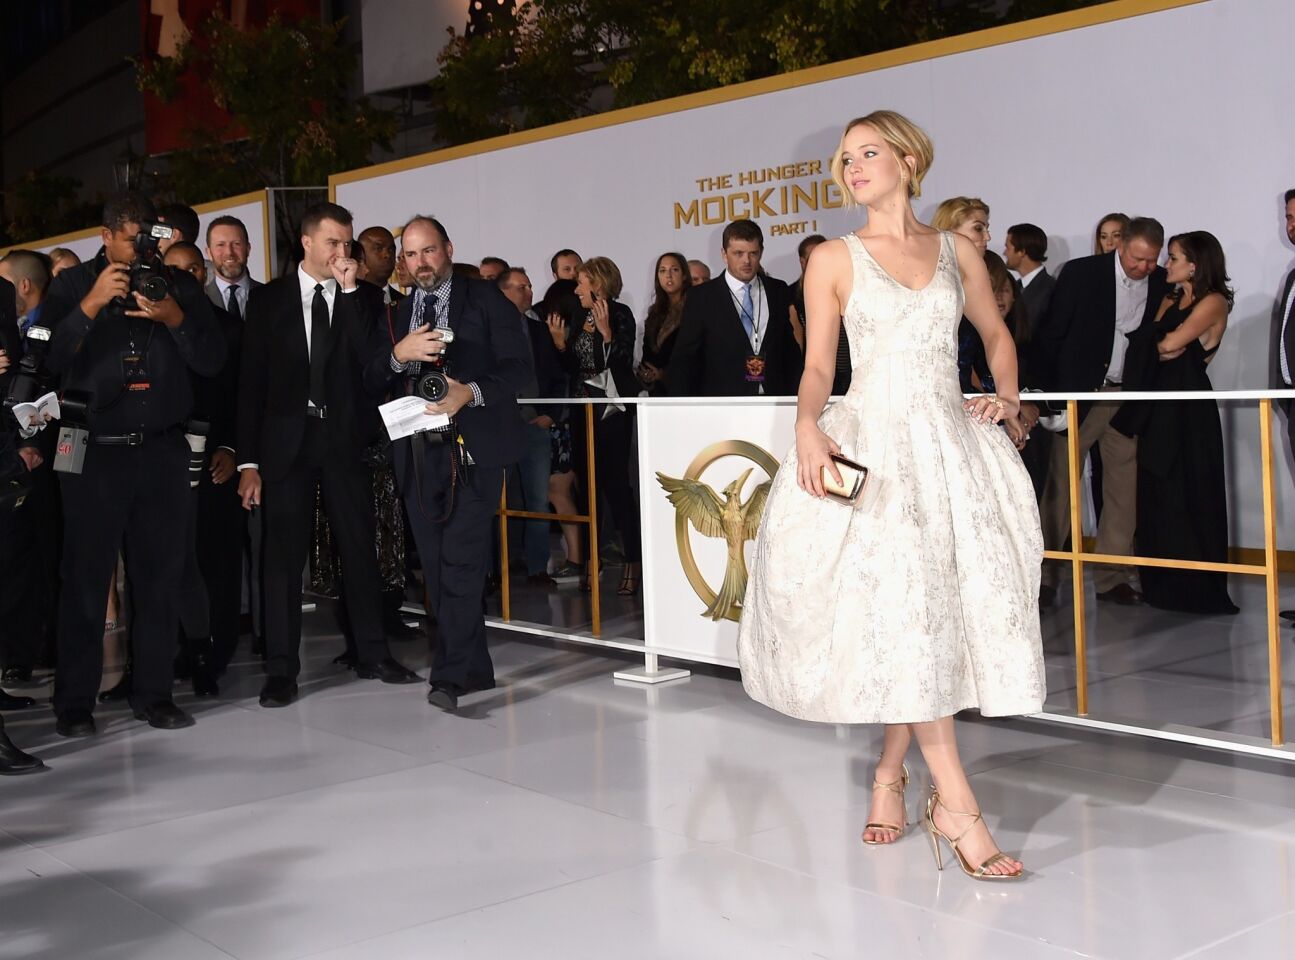 The Dior spokeswoman wears another dress from the French house for the L.A. premiere of "Mockingjay -- Part 1" on Nov. 17. The dress -- presented as a floor-length gown on the runway -- is shortened and styled with Aquazurra "Linda" heels and Vita Fede earrings.